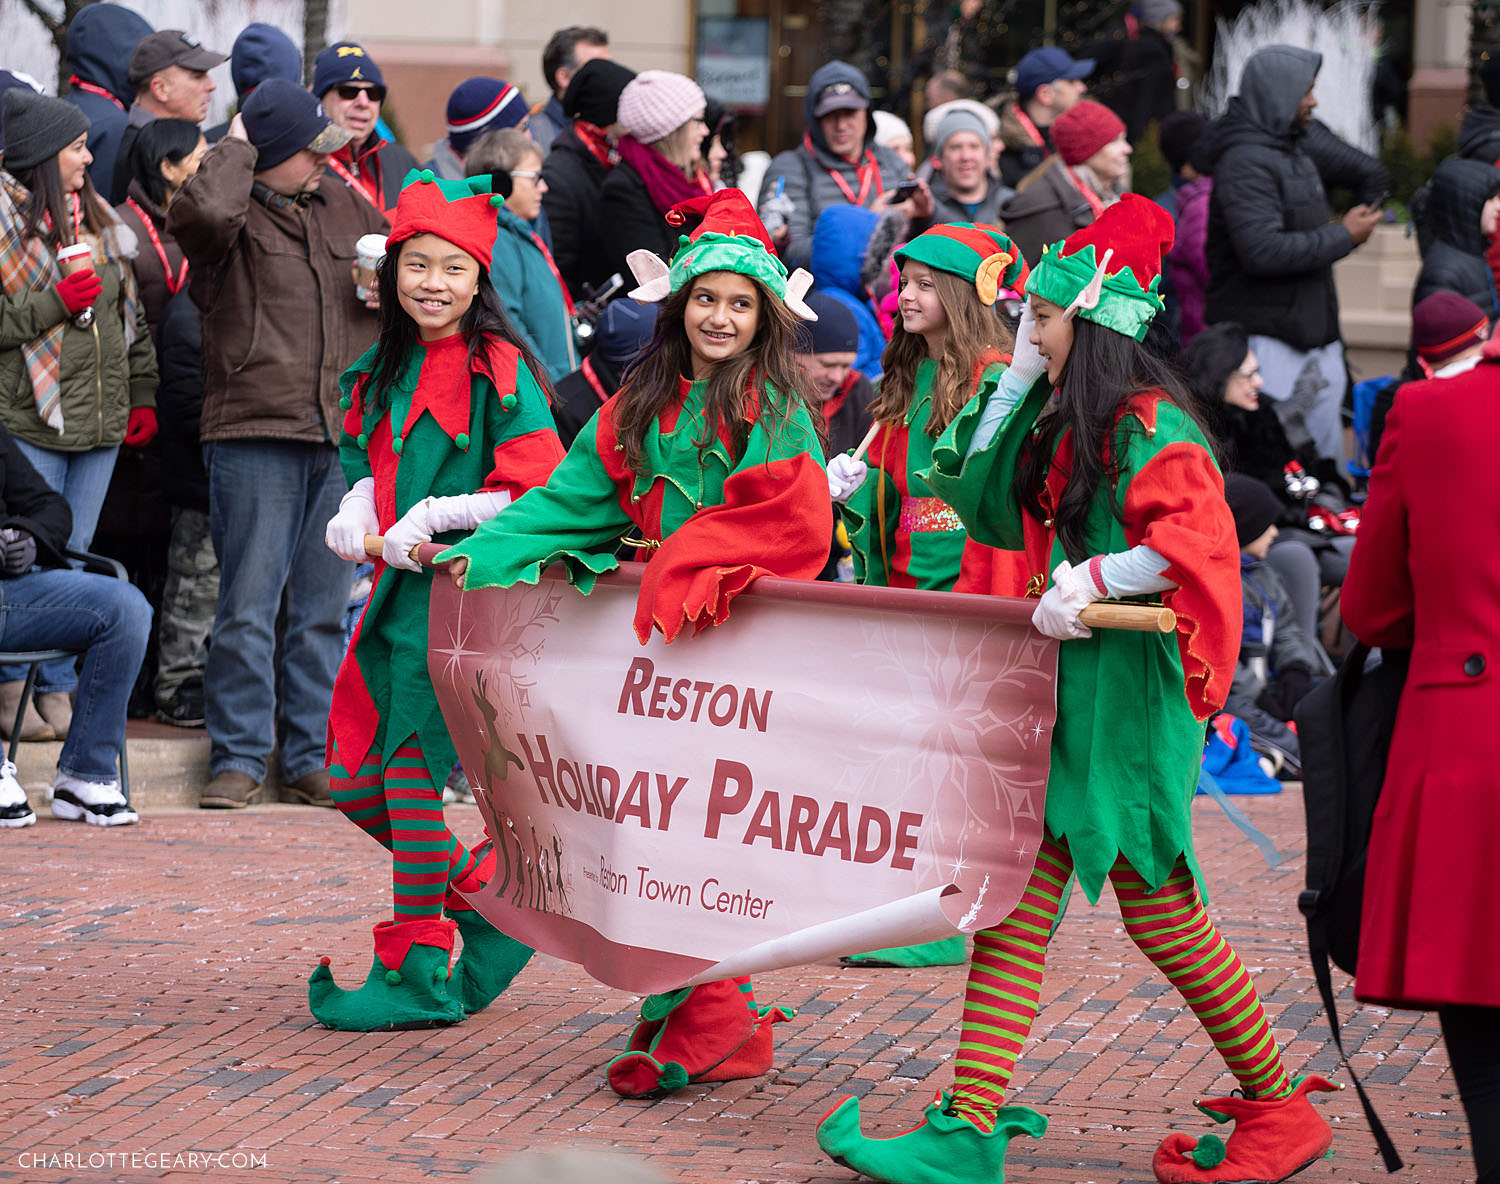 The Reston Holiday Parade The best local way to kick off the holidays